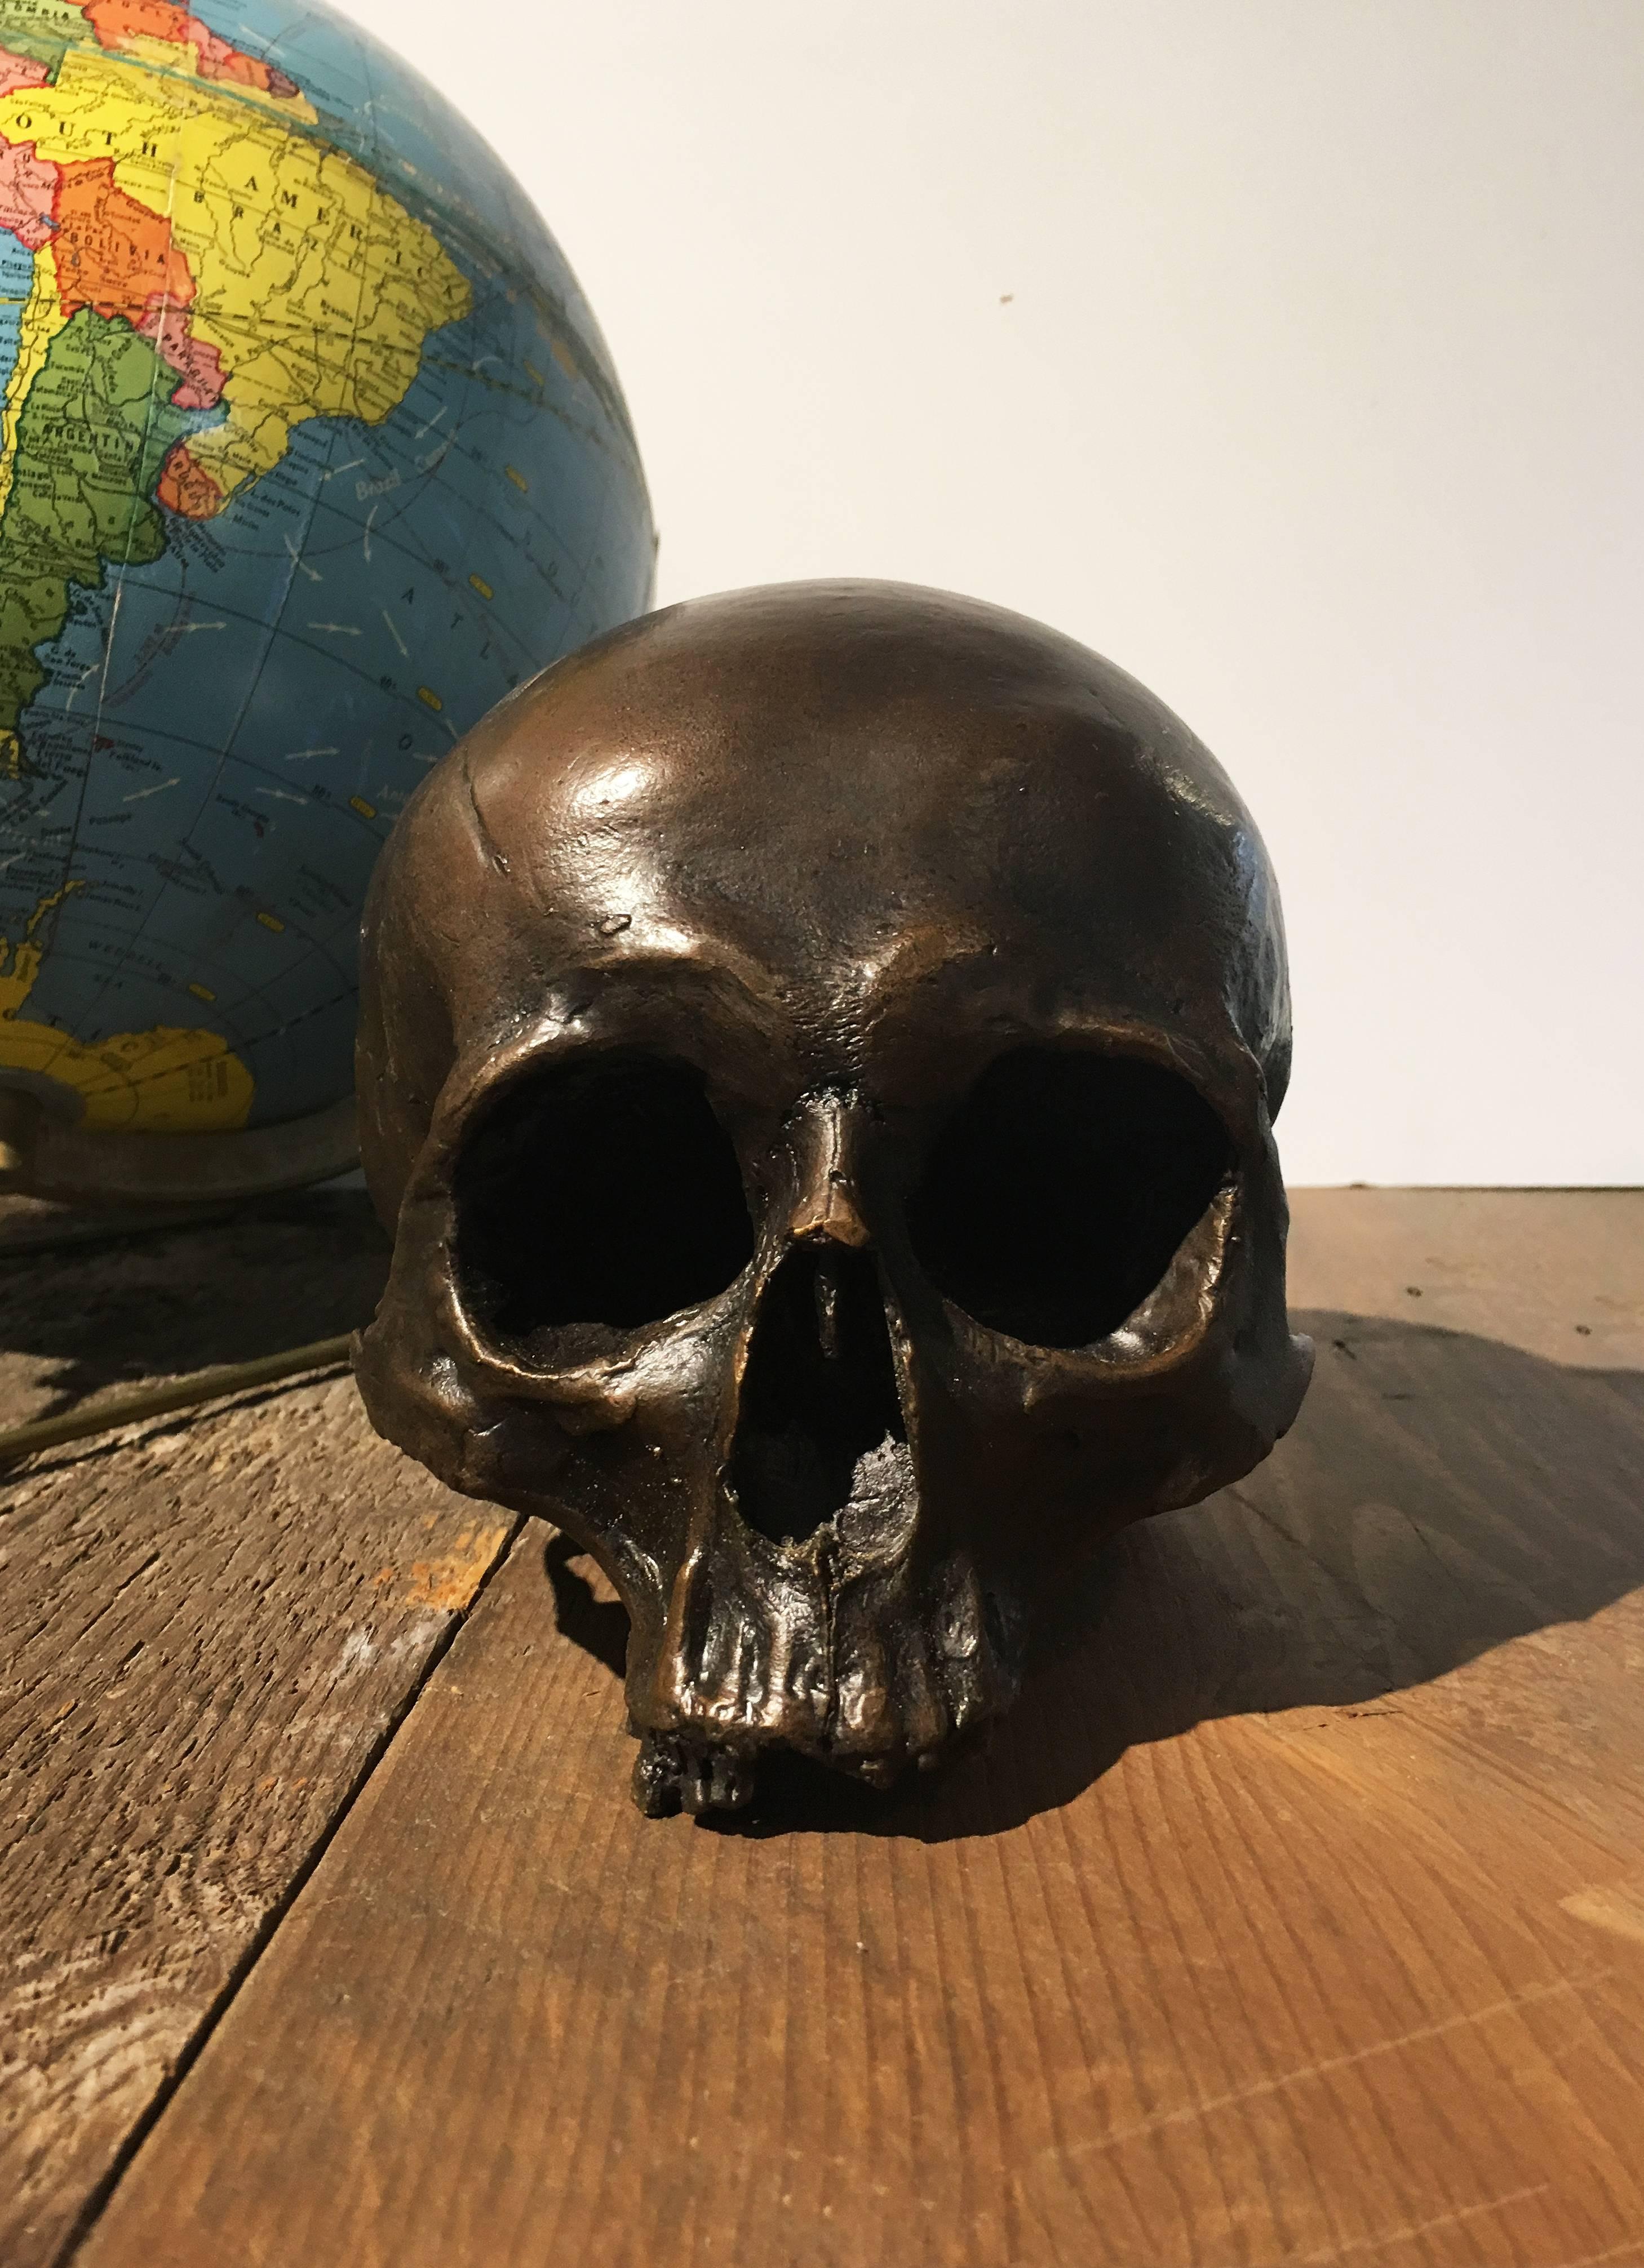 Cast bronze skull. Approximately 10 pounds; heavy enough to be used as a book end or large paperweight in library or office. 

Pictured with bronze skull with silver patina.